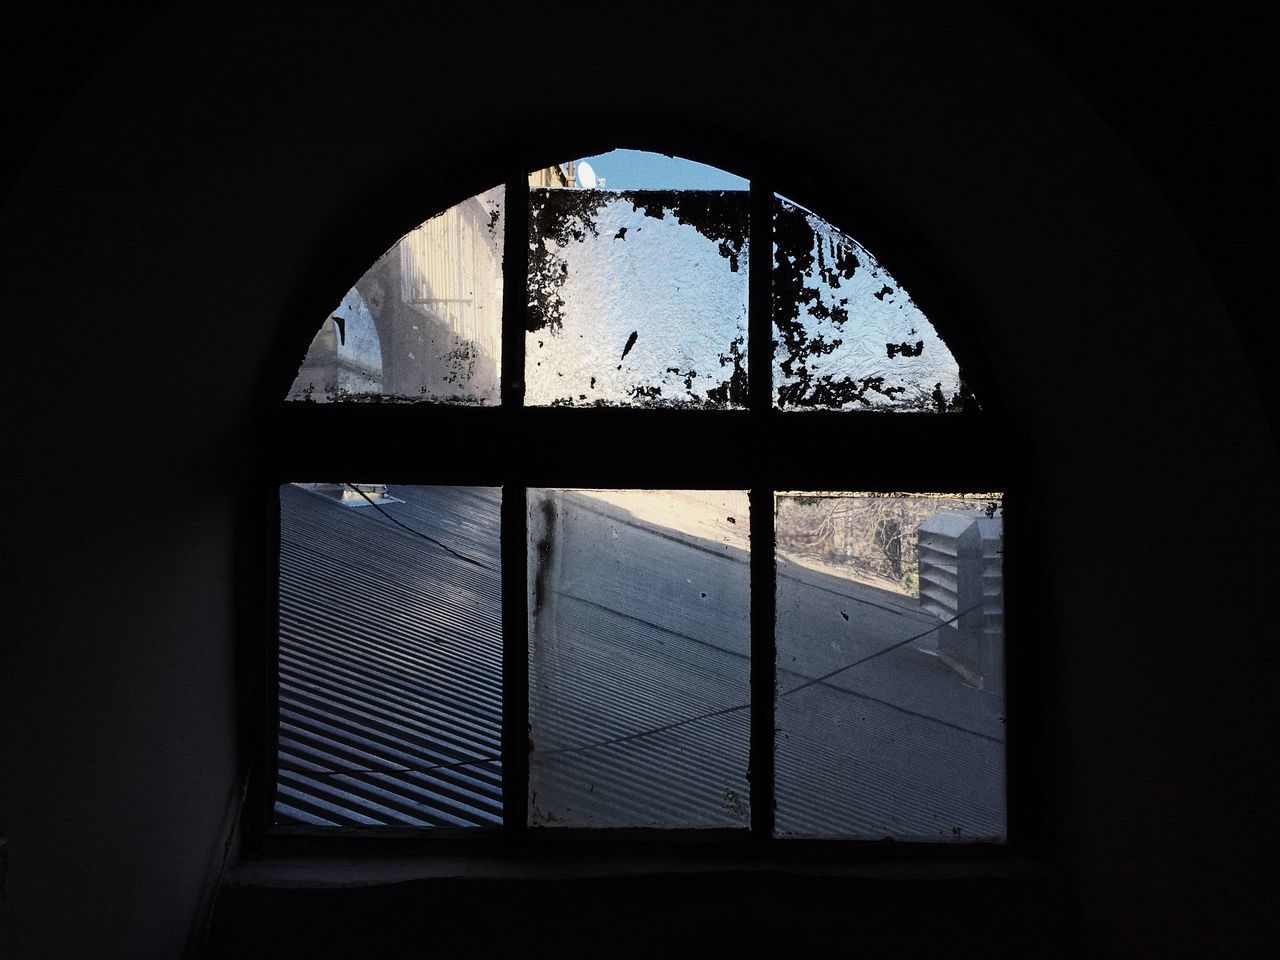 WINDOW OF BUILDING AGAINST SKY SEEN THROUGH ARCH